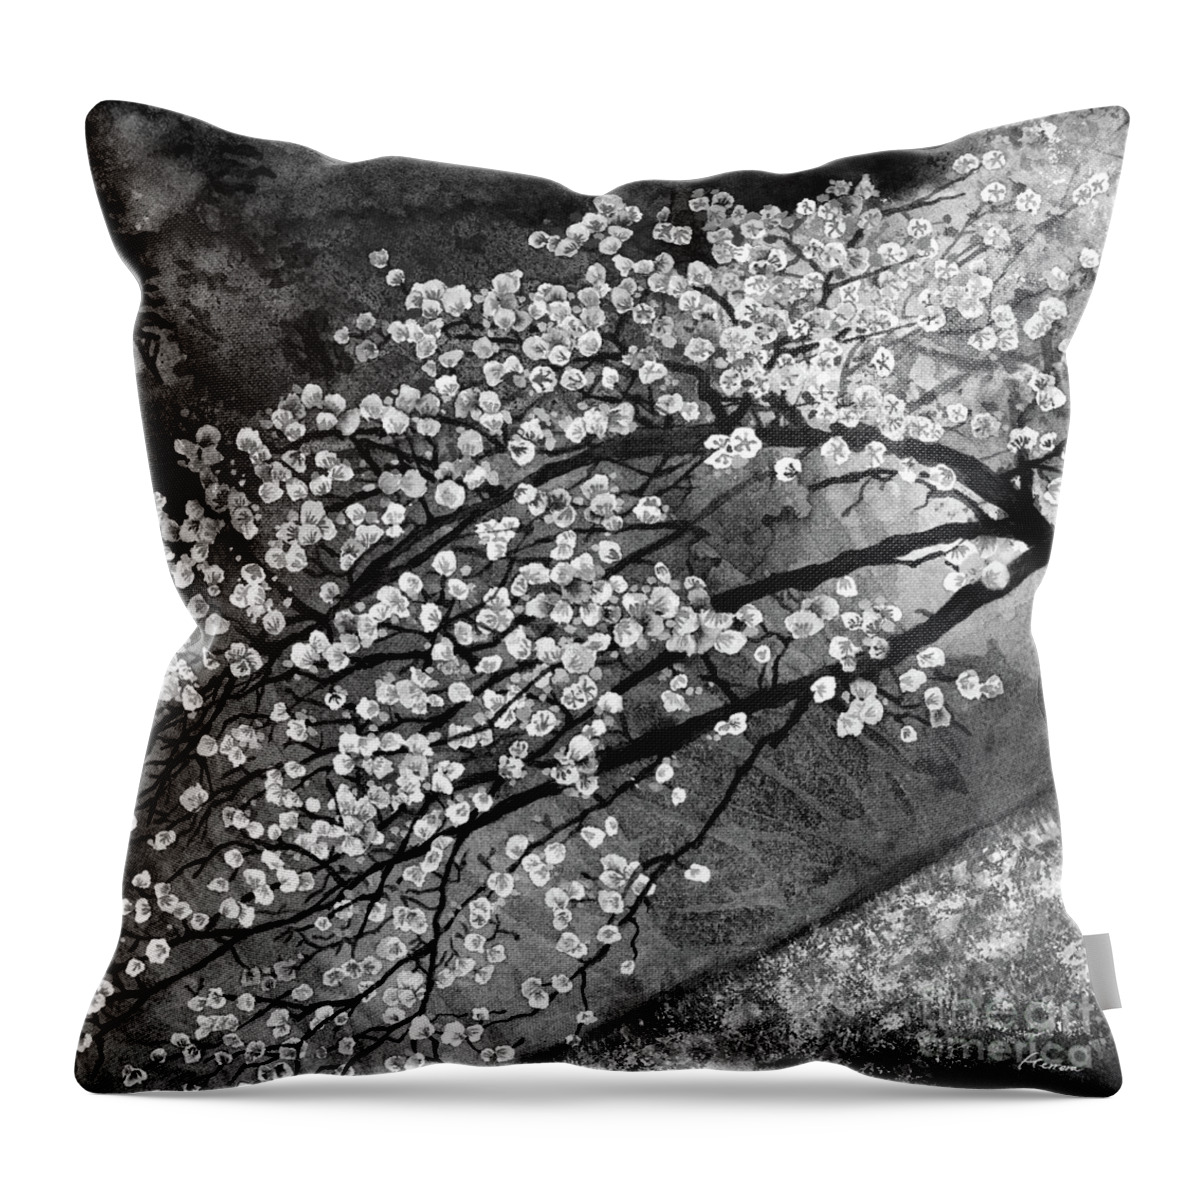 Cherry Blossom Throw Pillow featuring the painting Cherry Blossoms In Bloom - Black and Whtie by Hailey E Herrera